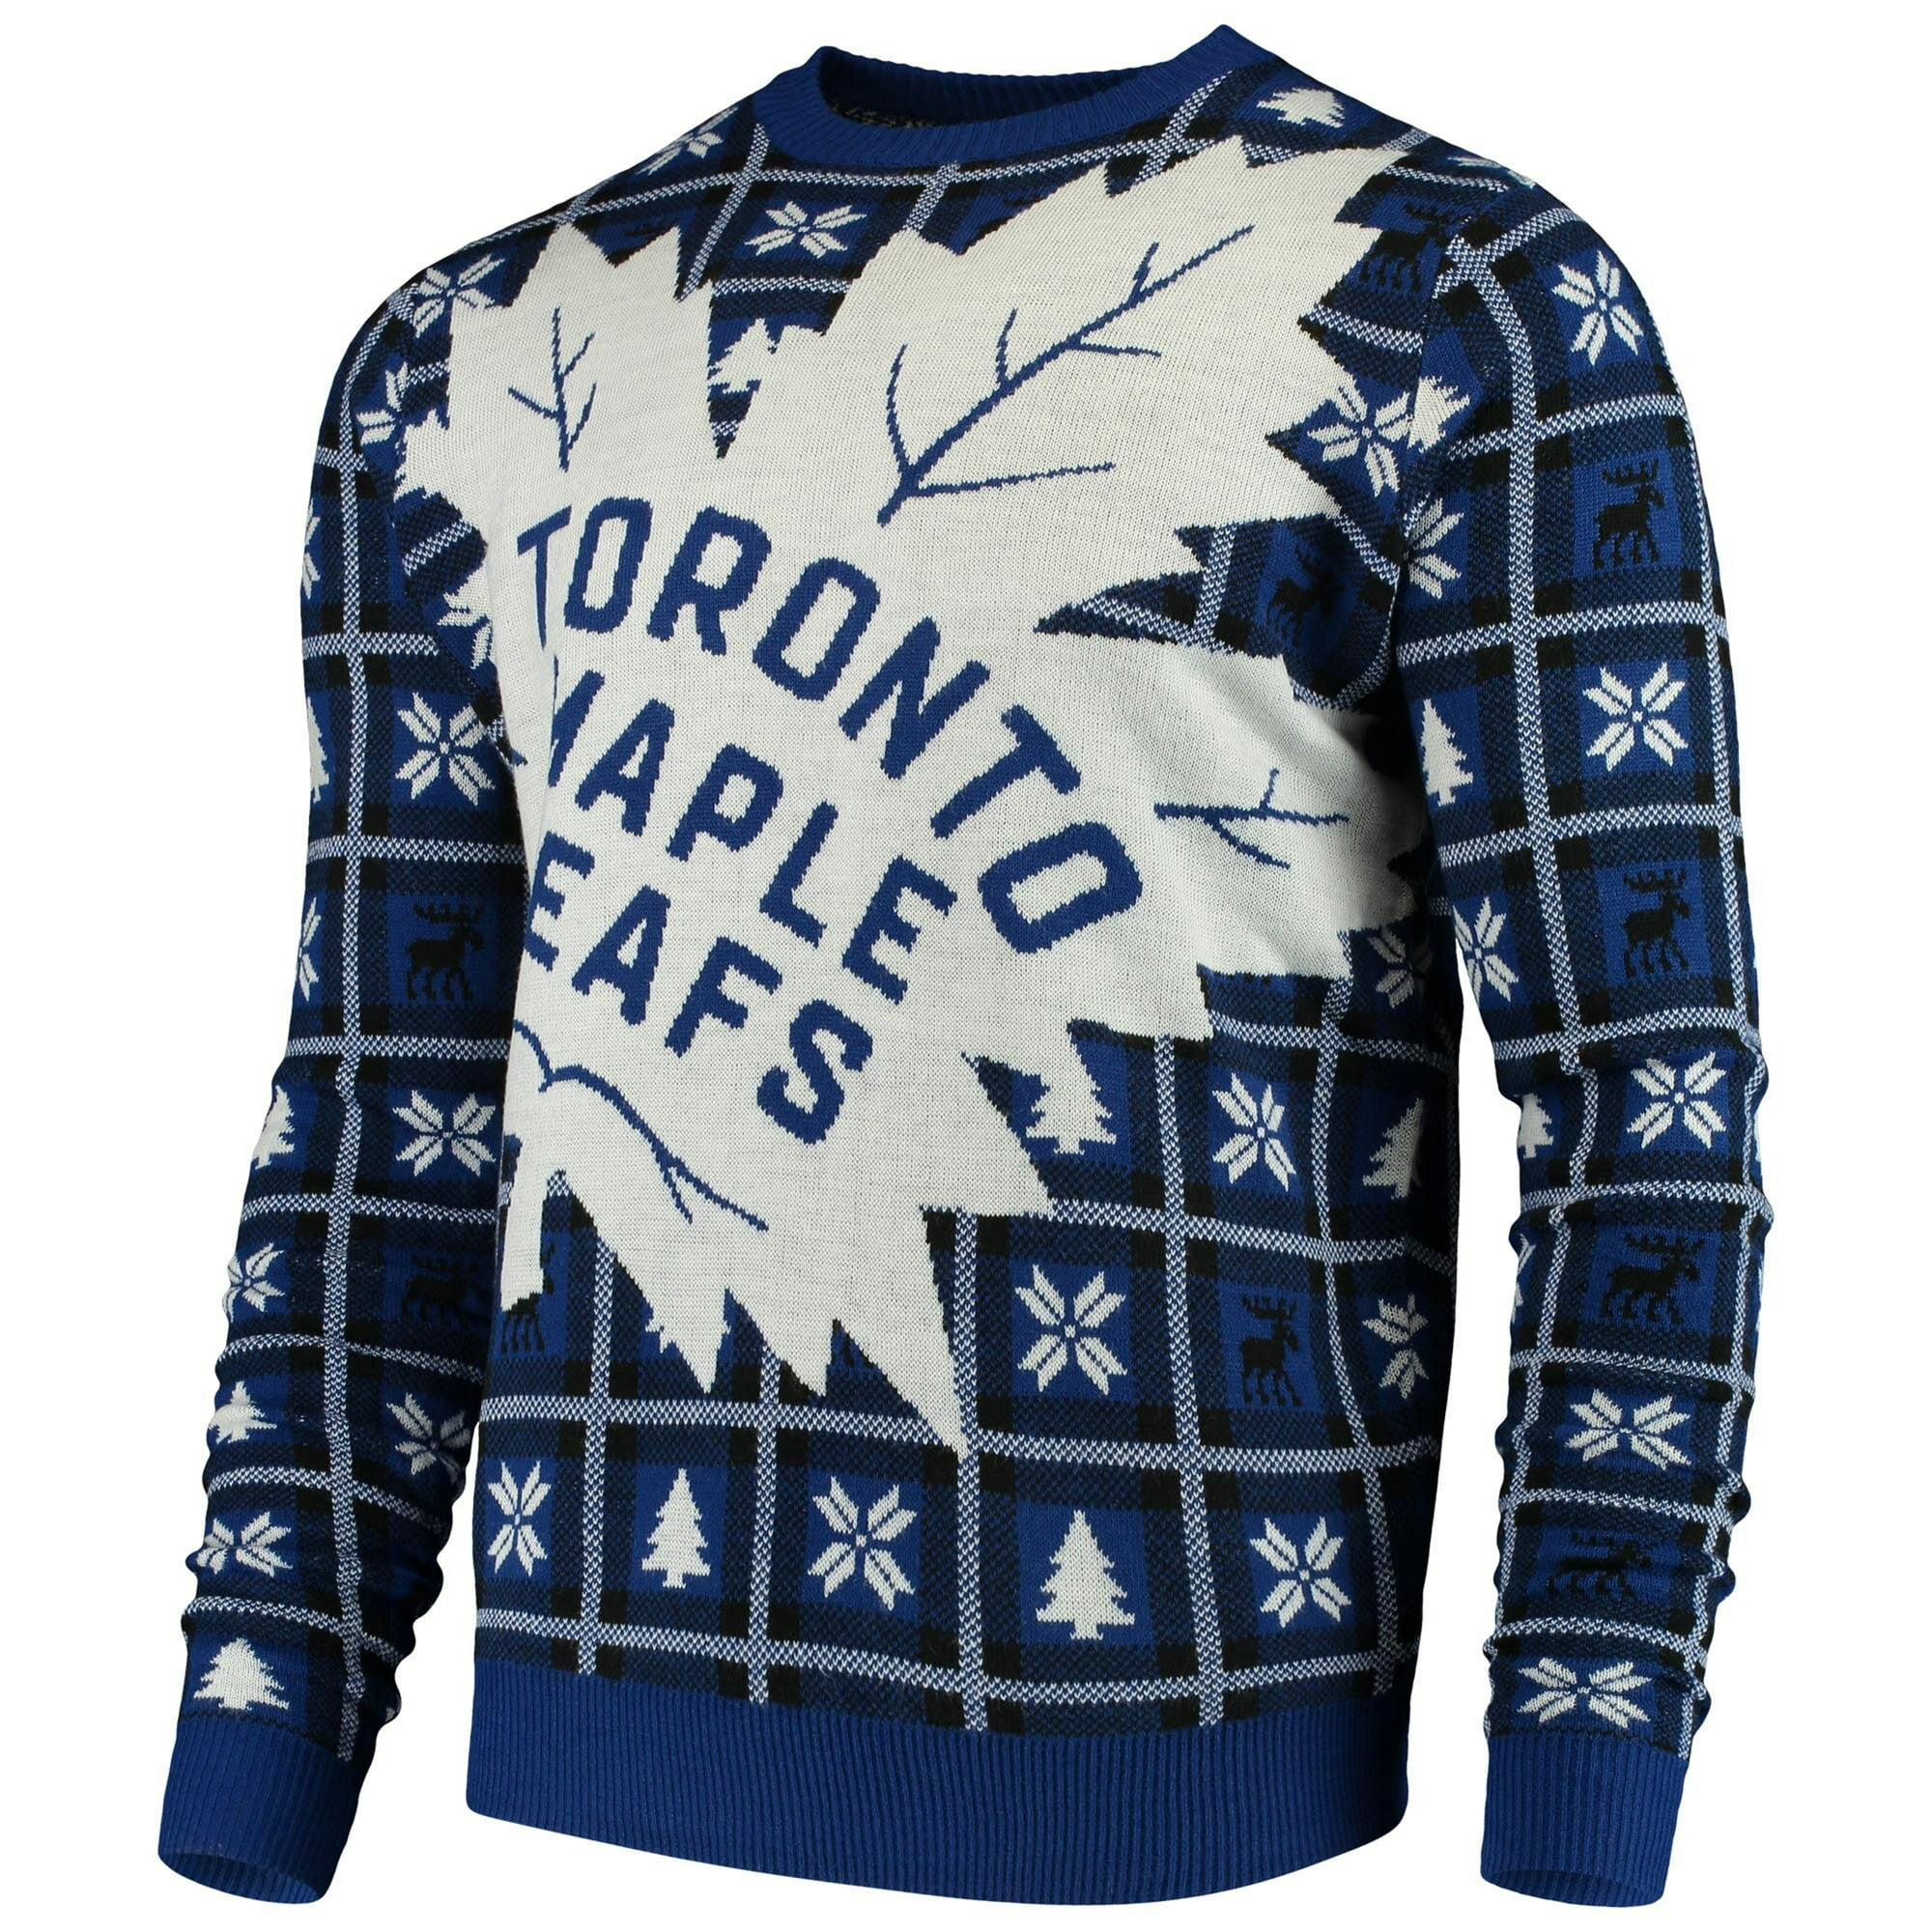 Personalized NHL Toronto Maple Leafs Elk Pattern Ugly Christmas